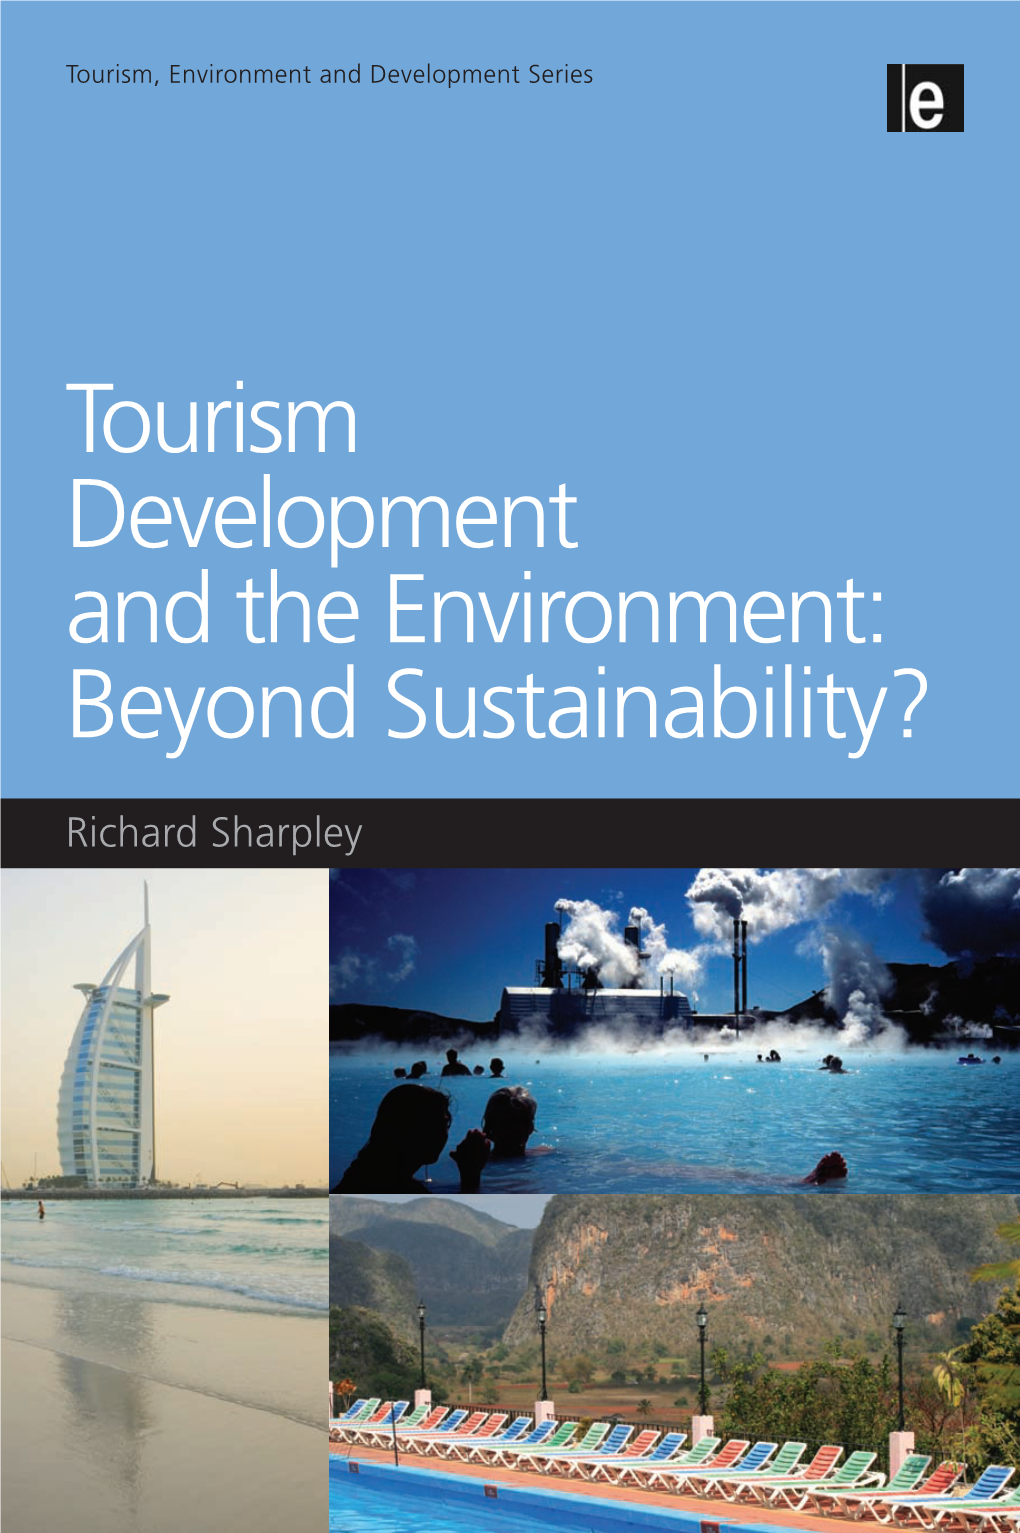 Tourism Development and the Environment: Beyond Sustainability? and Thought-Provoking Critique of Sustainable Tourism Development